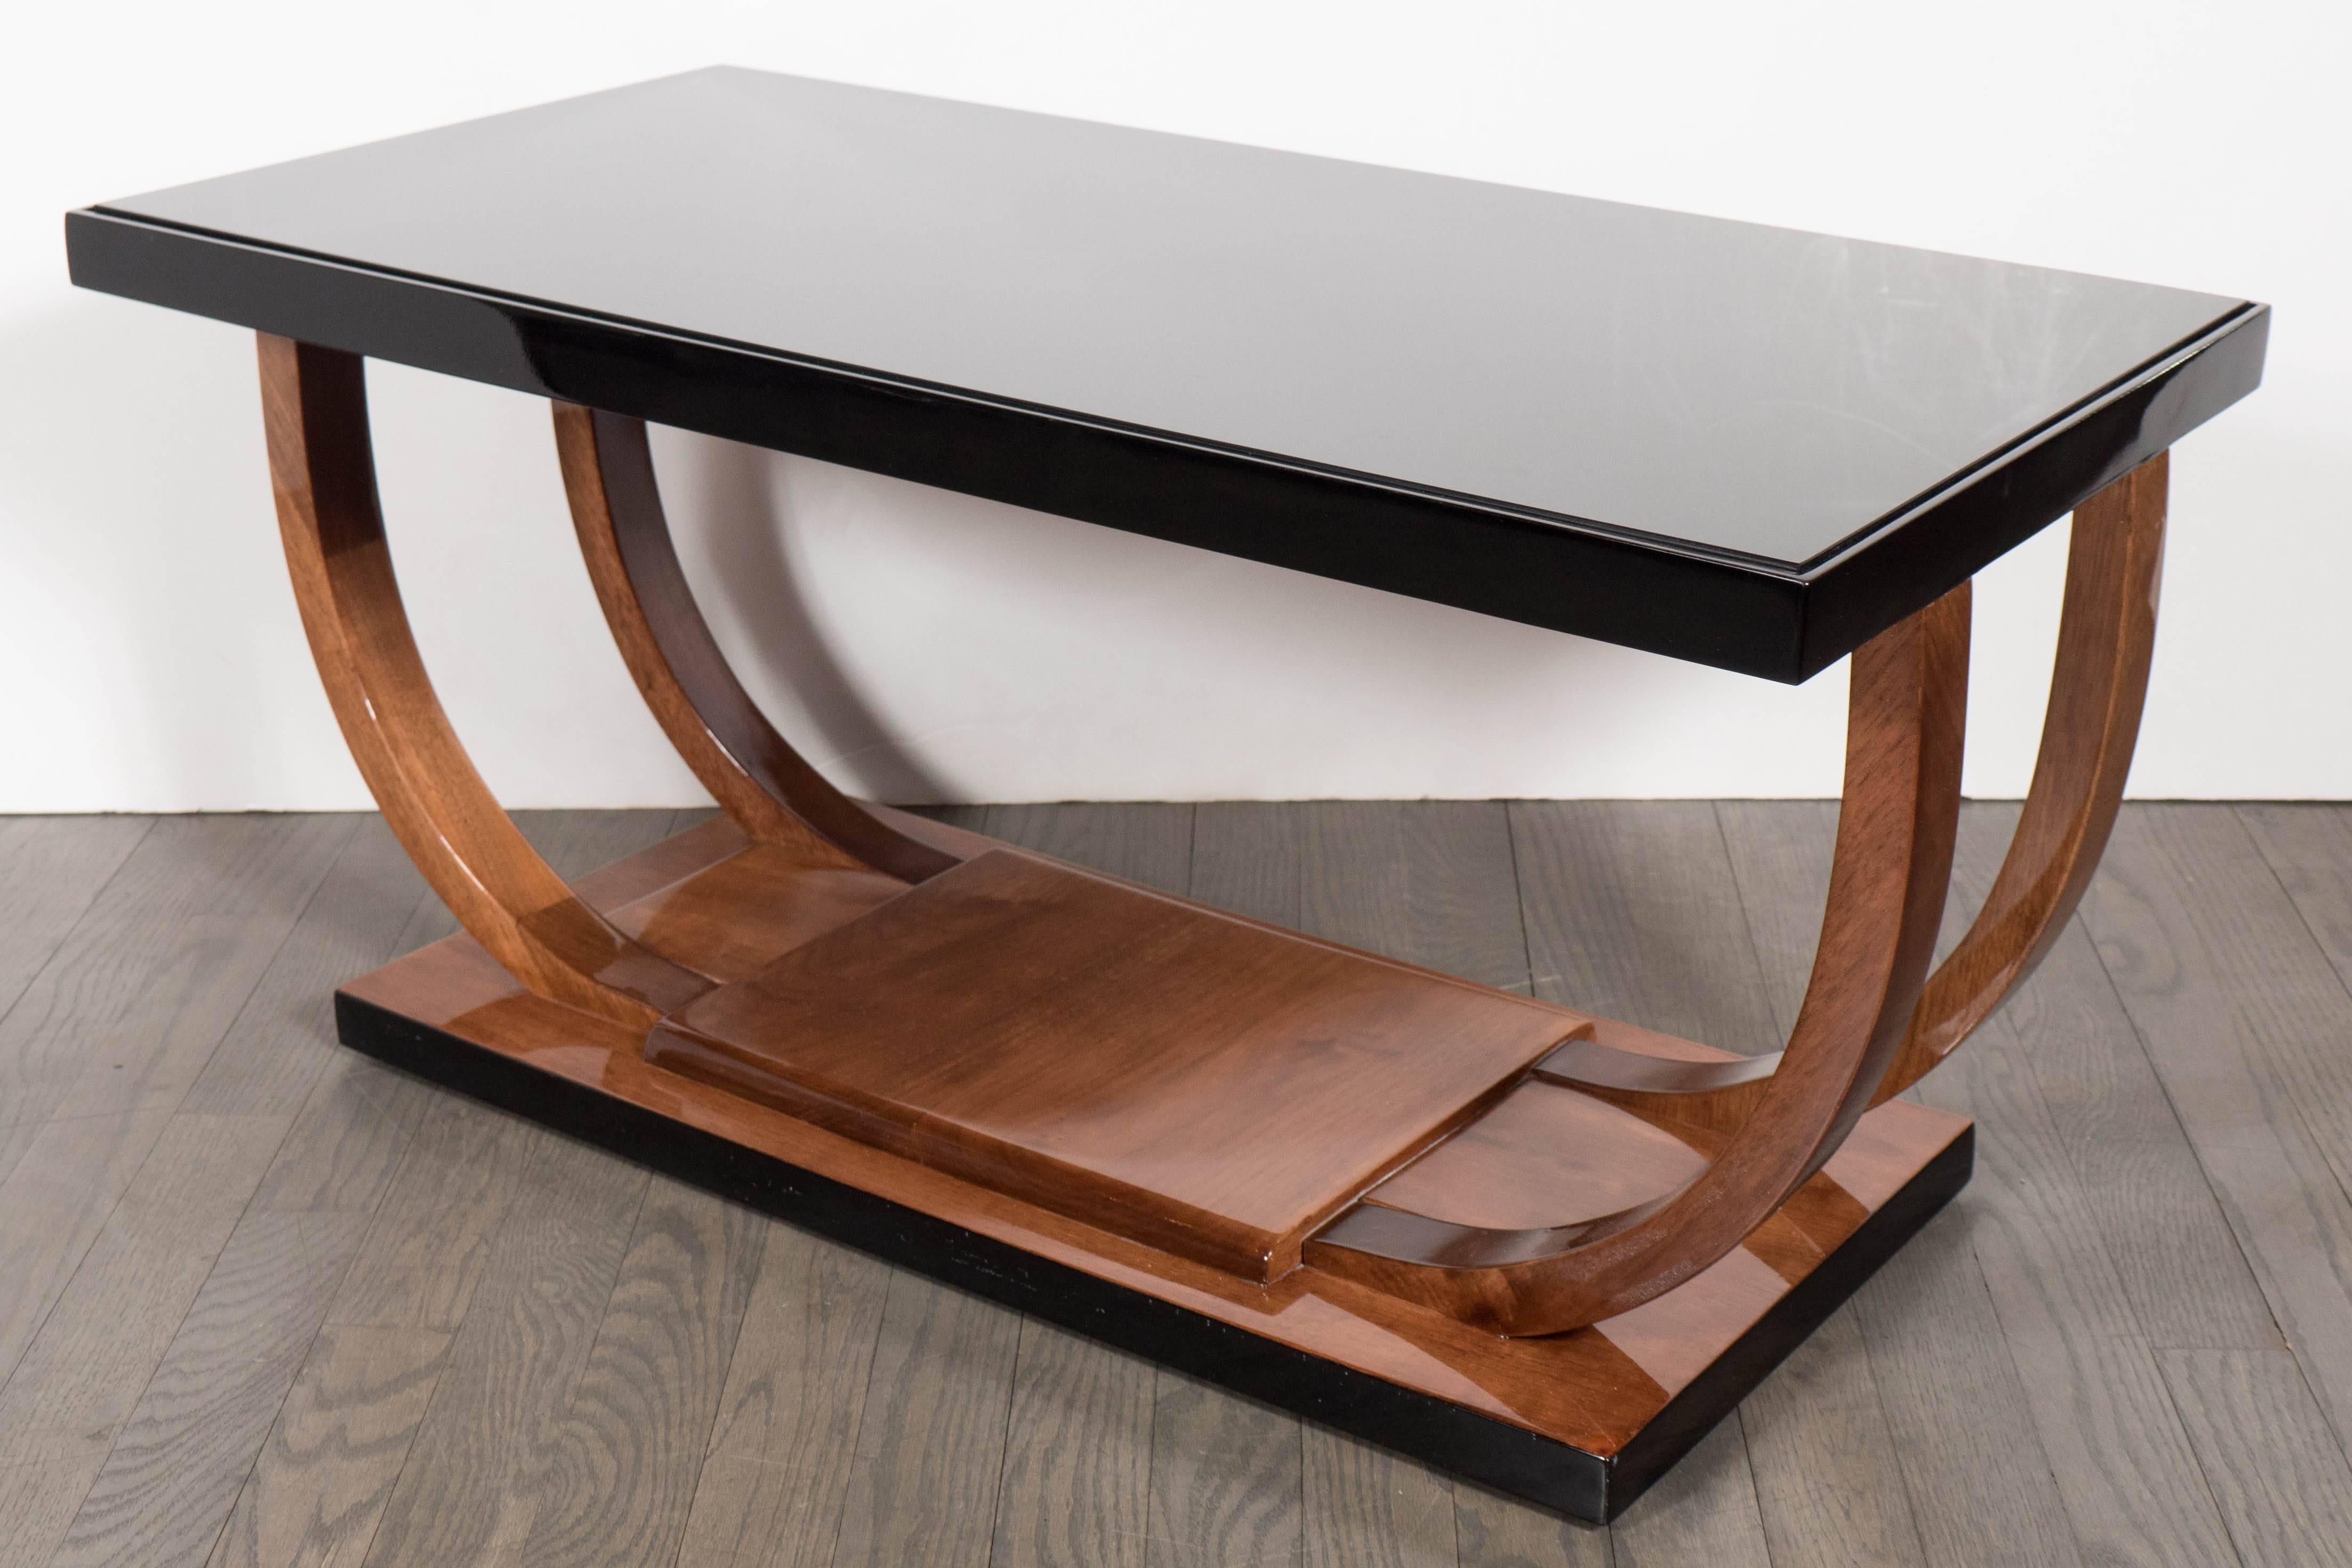 American Art Deco Machine Age Streamlined Cocktail Table in Walnut and Black Lacquer